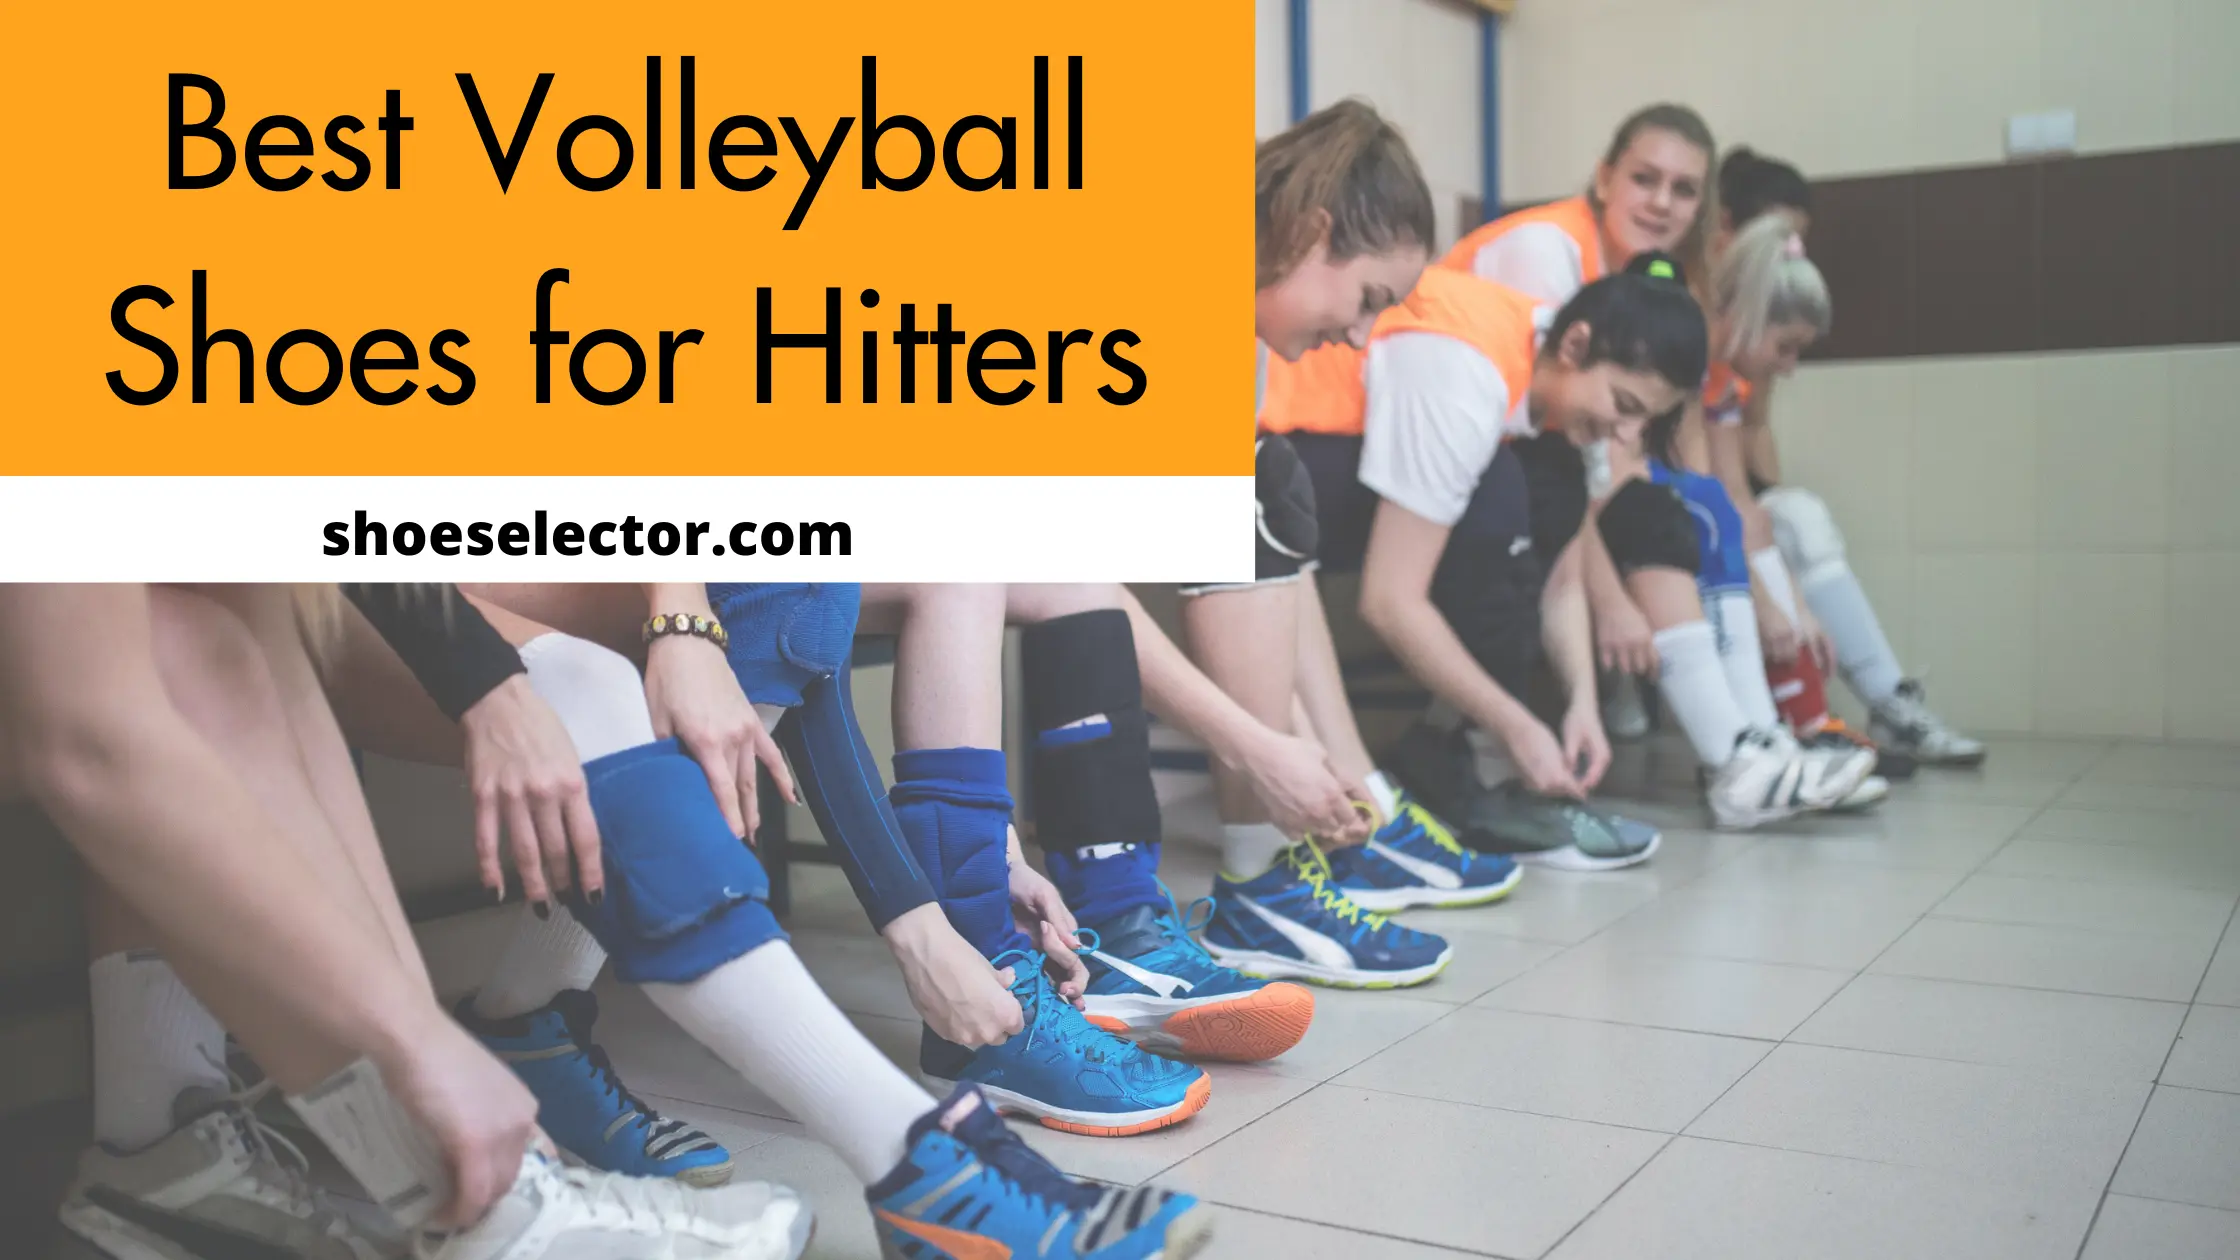 Best Volleyball Shoes For Hitters - Expert Choice